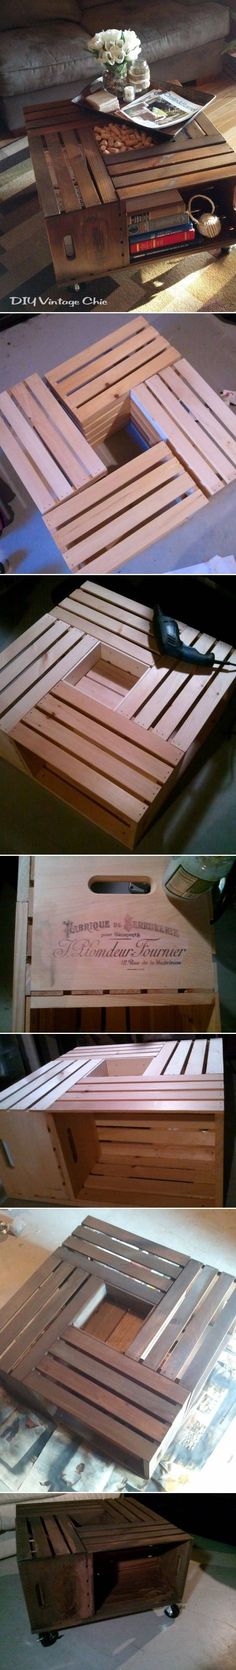 6. OLD WINE CRATES COMBINED IN A SKILLFUL MANNER